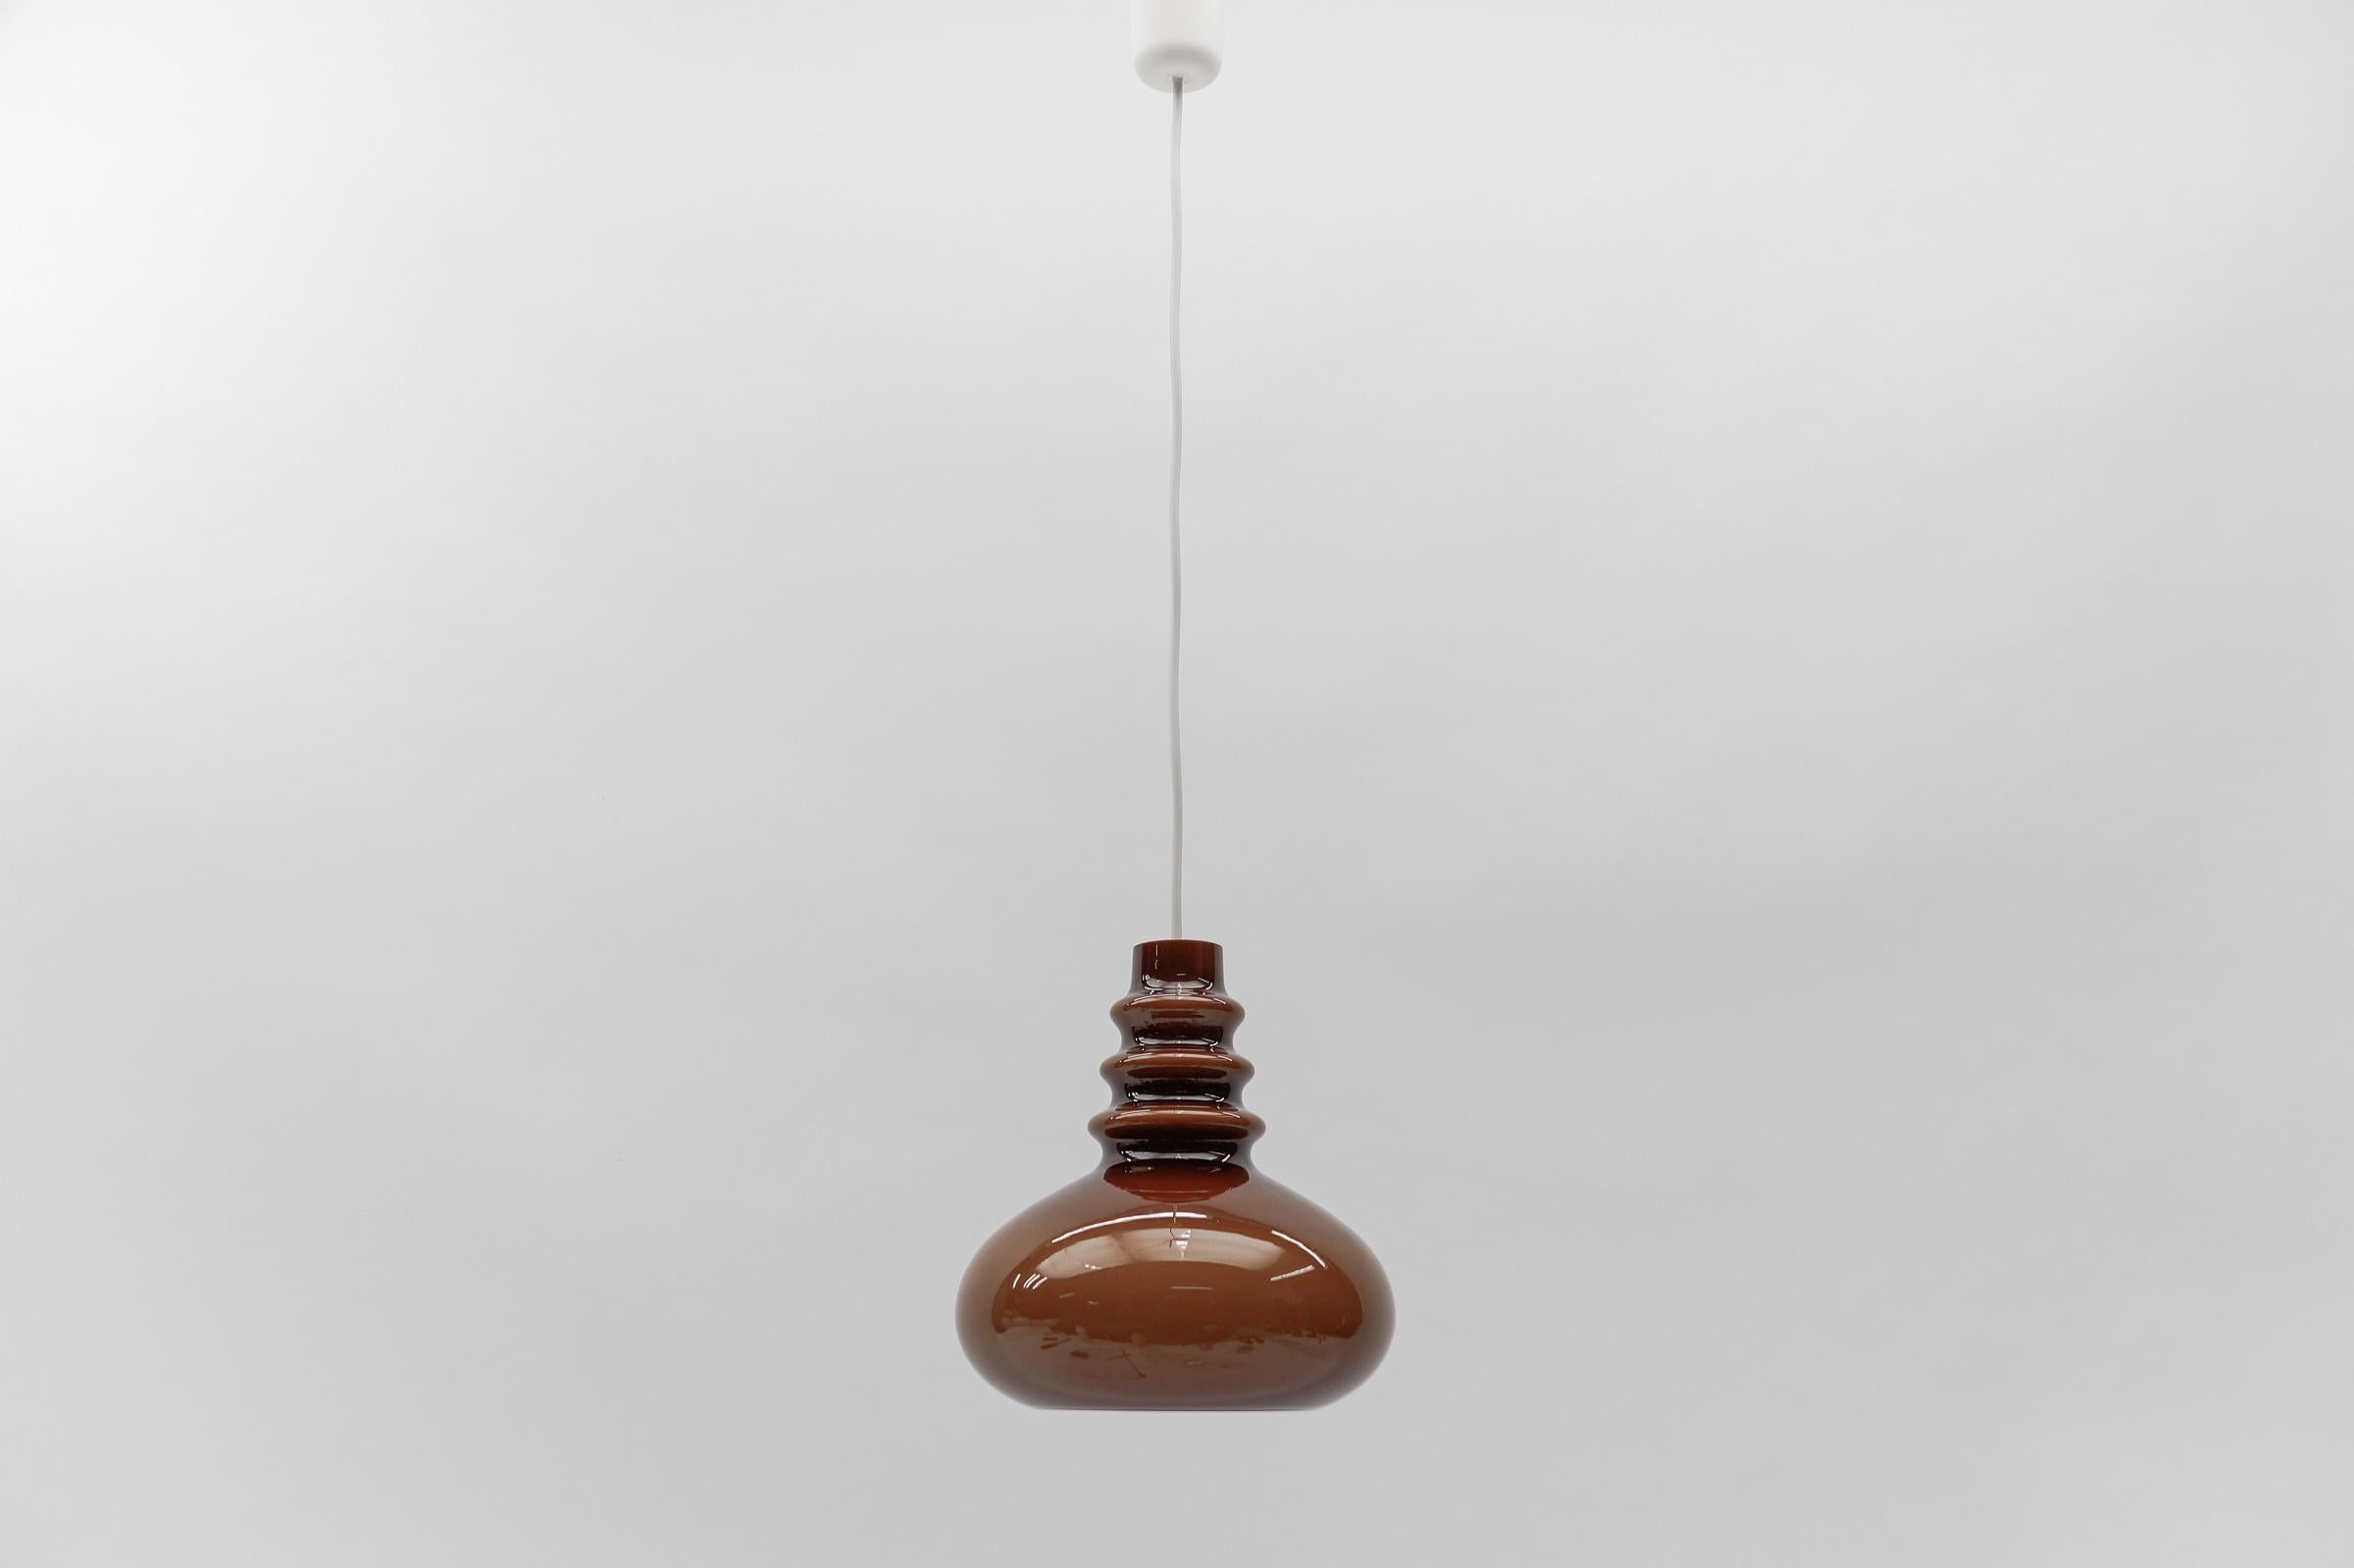 Lovely Choco Brown Glass Ceiling Lamp by Peill & Putzler, 1960s

The lamp need 1x E27 / E26 Edison screw fit bulb, is wired, in working condition and runs both on 110 / 230 volt.

Light bulbs are not included.

It is possible to install this fixture